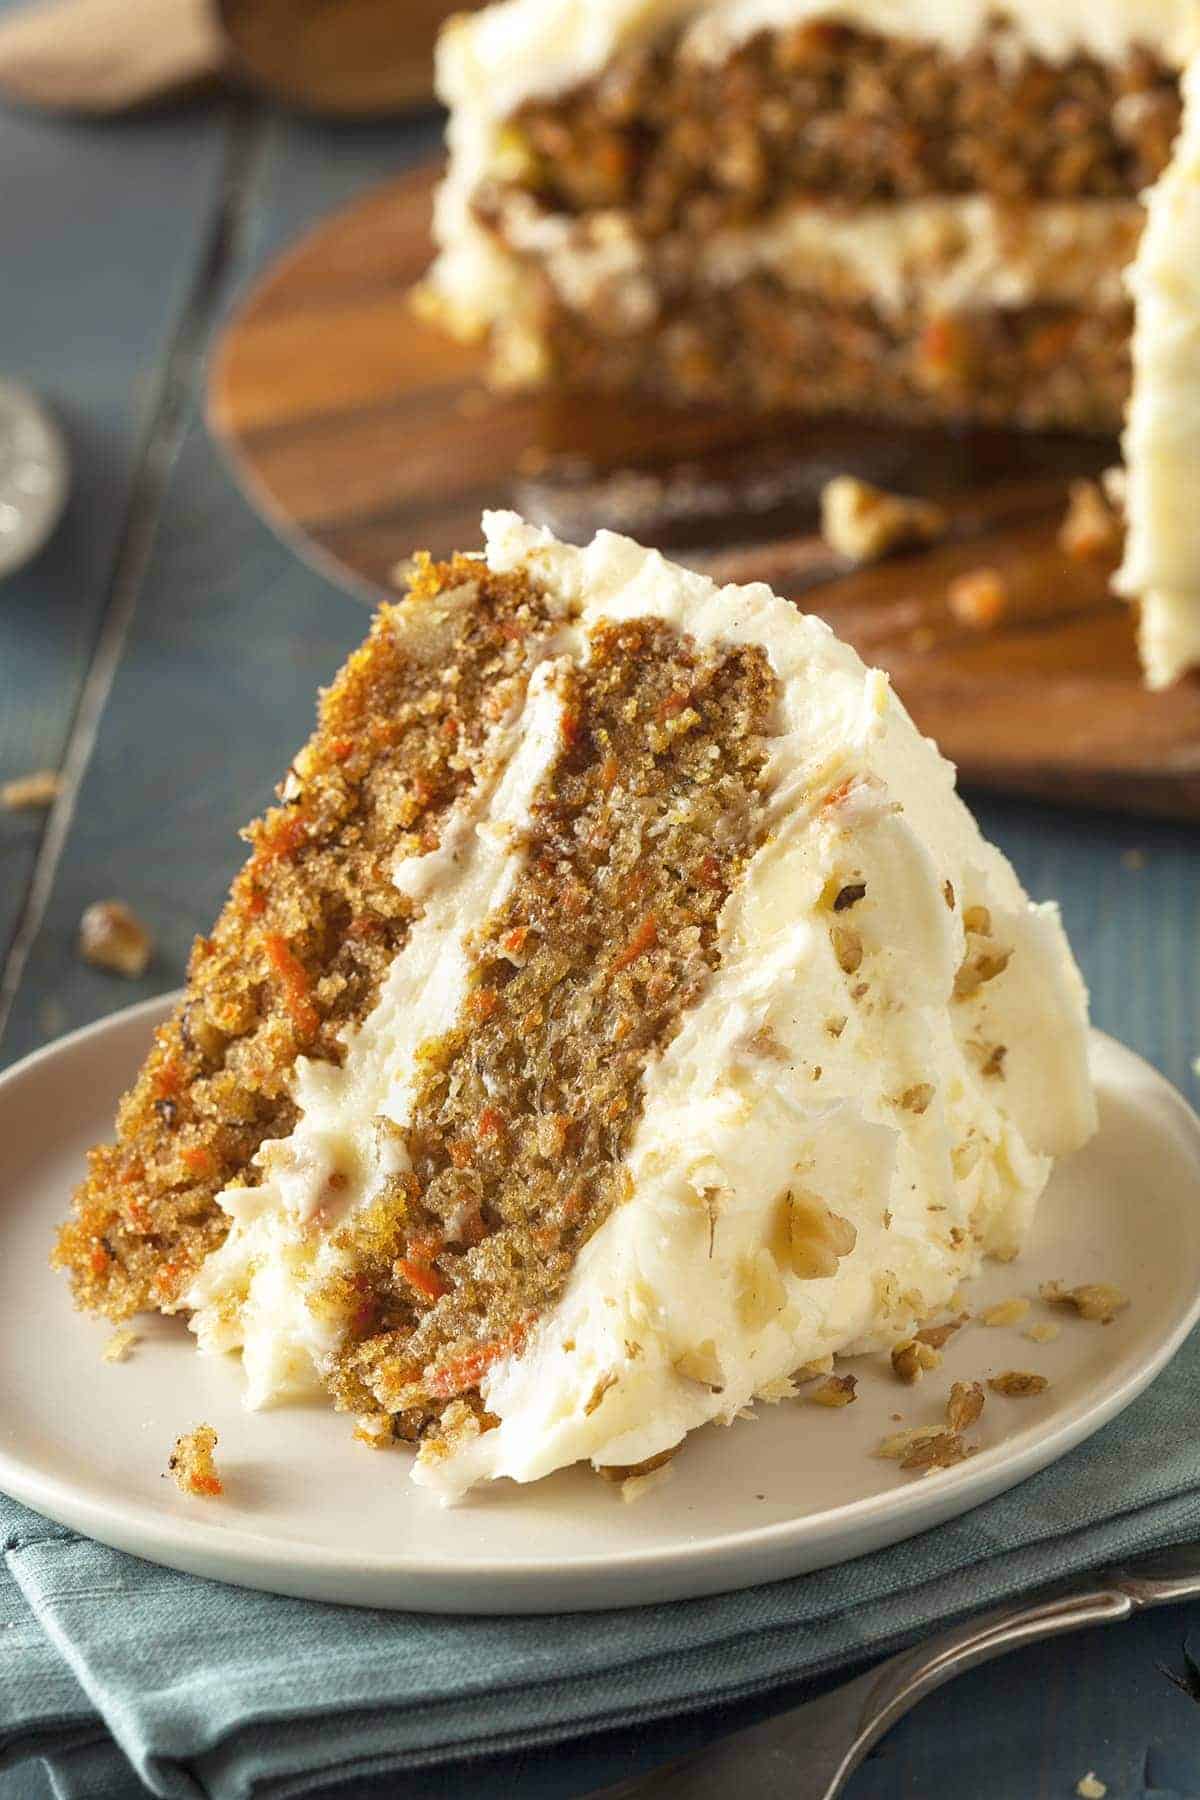 Slice of homemade carrot cake on a plate with walnuts sprinkled on top